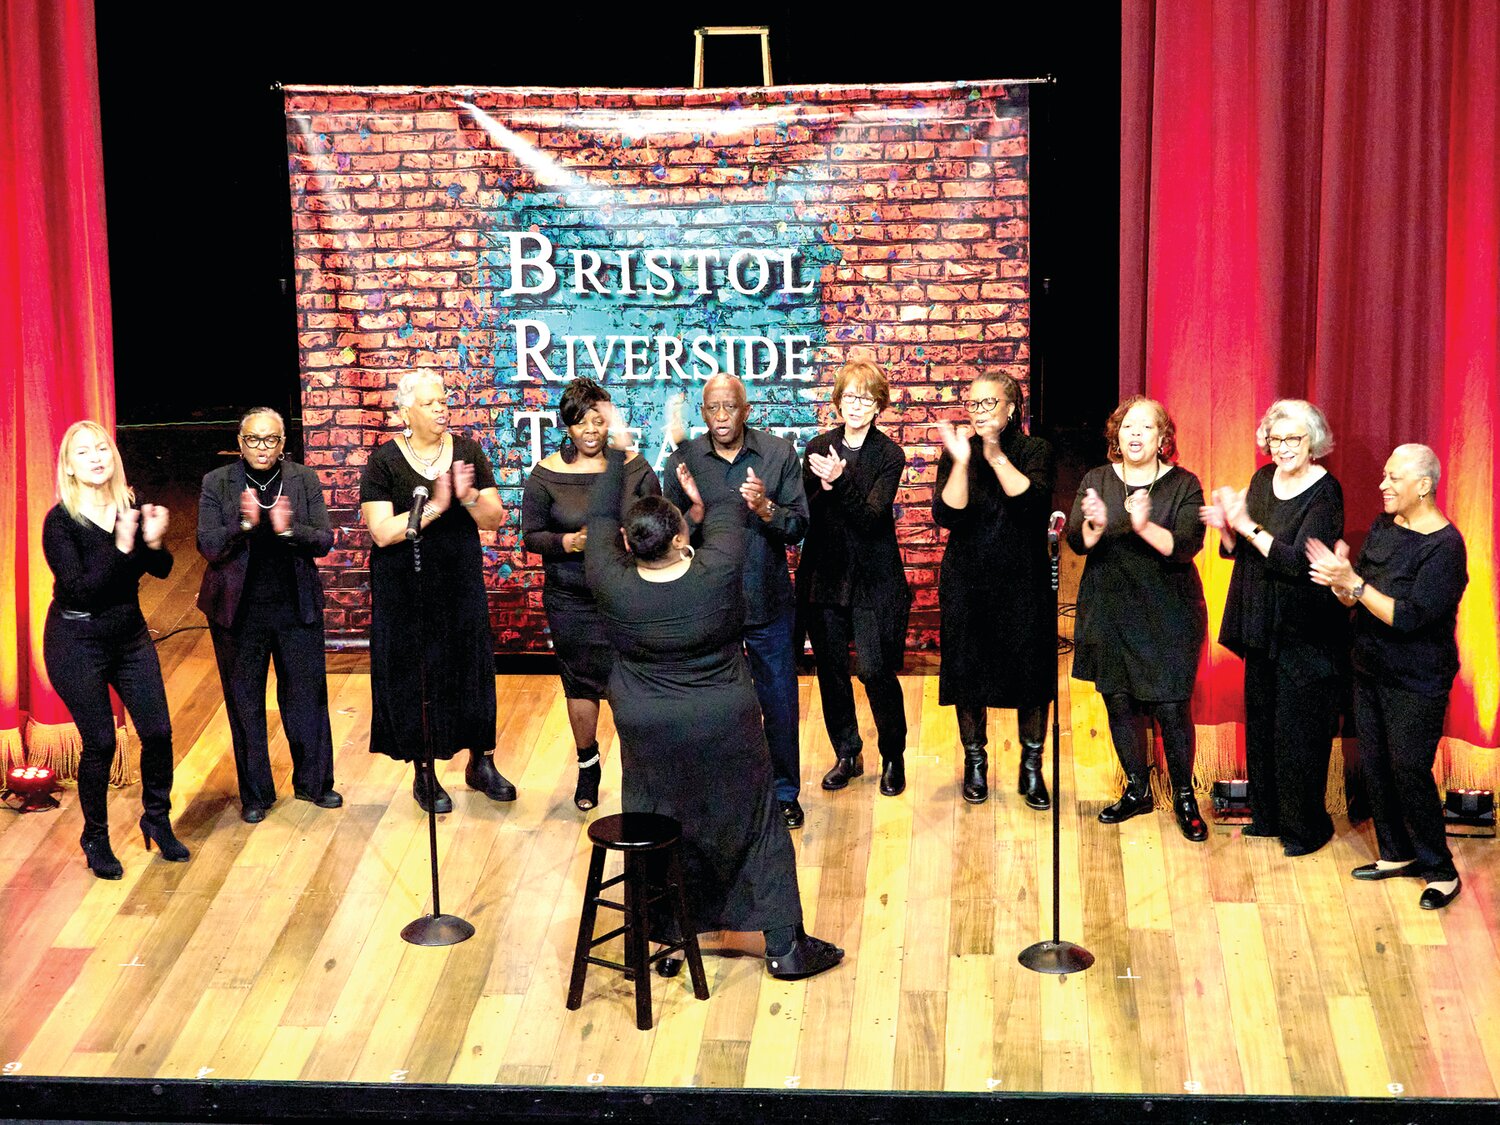 Essence of Harmony Choral Society, of Burlington, N.J., performs at the “Chicken & Biscuits” Community Jam April 30 at the Bristol Riverside Theatre in Bristol Borough.